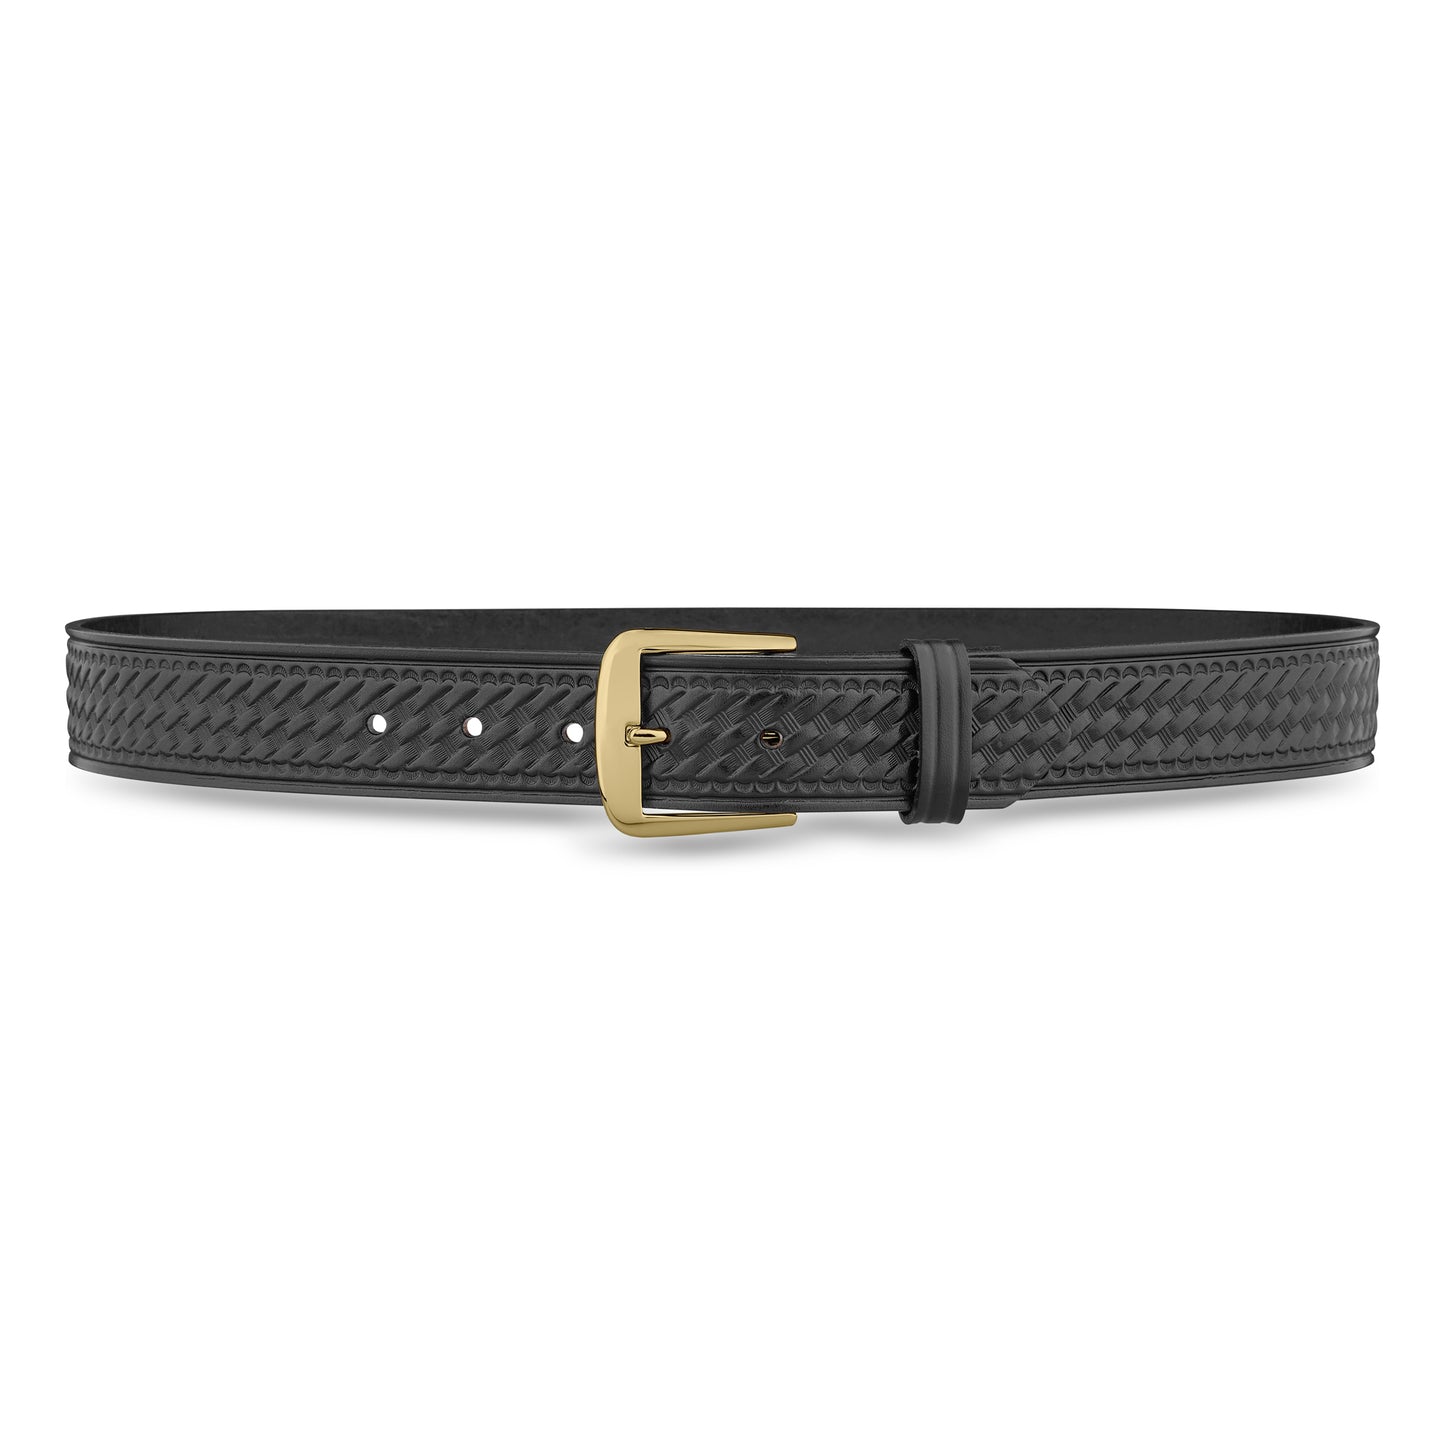 1-1/2" Black Basketweave Leather Thick Garrison Belt with Gold Buckle by Dutyman